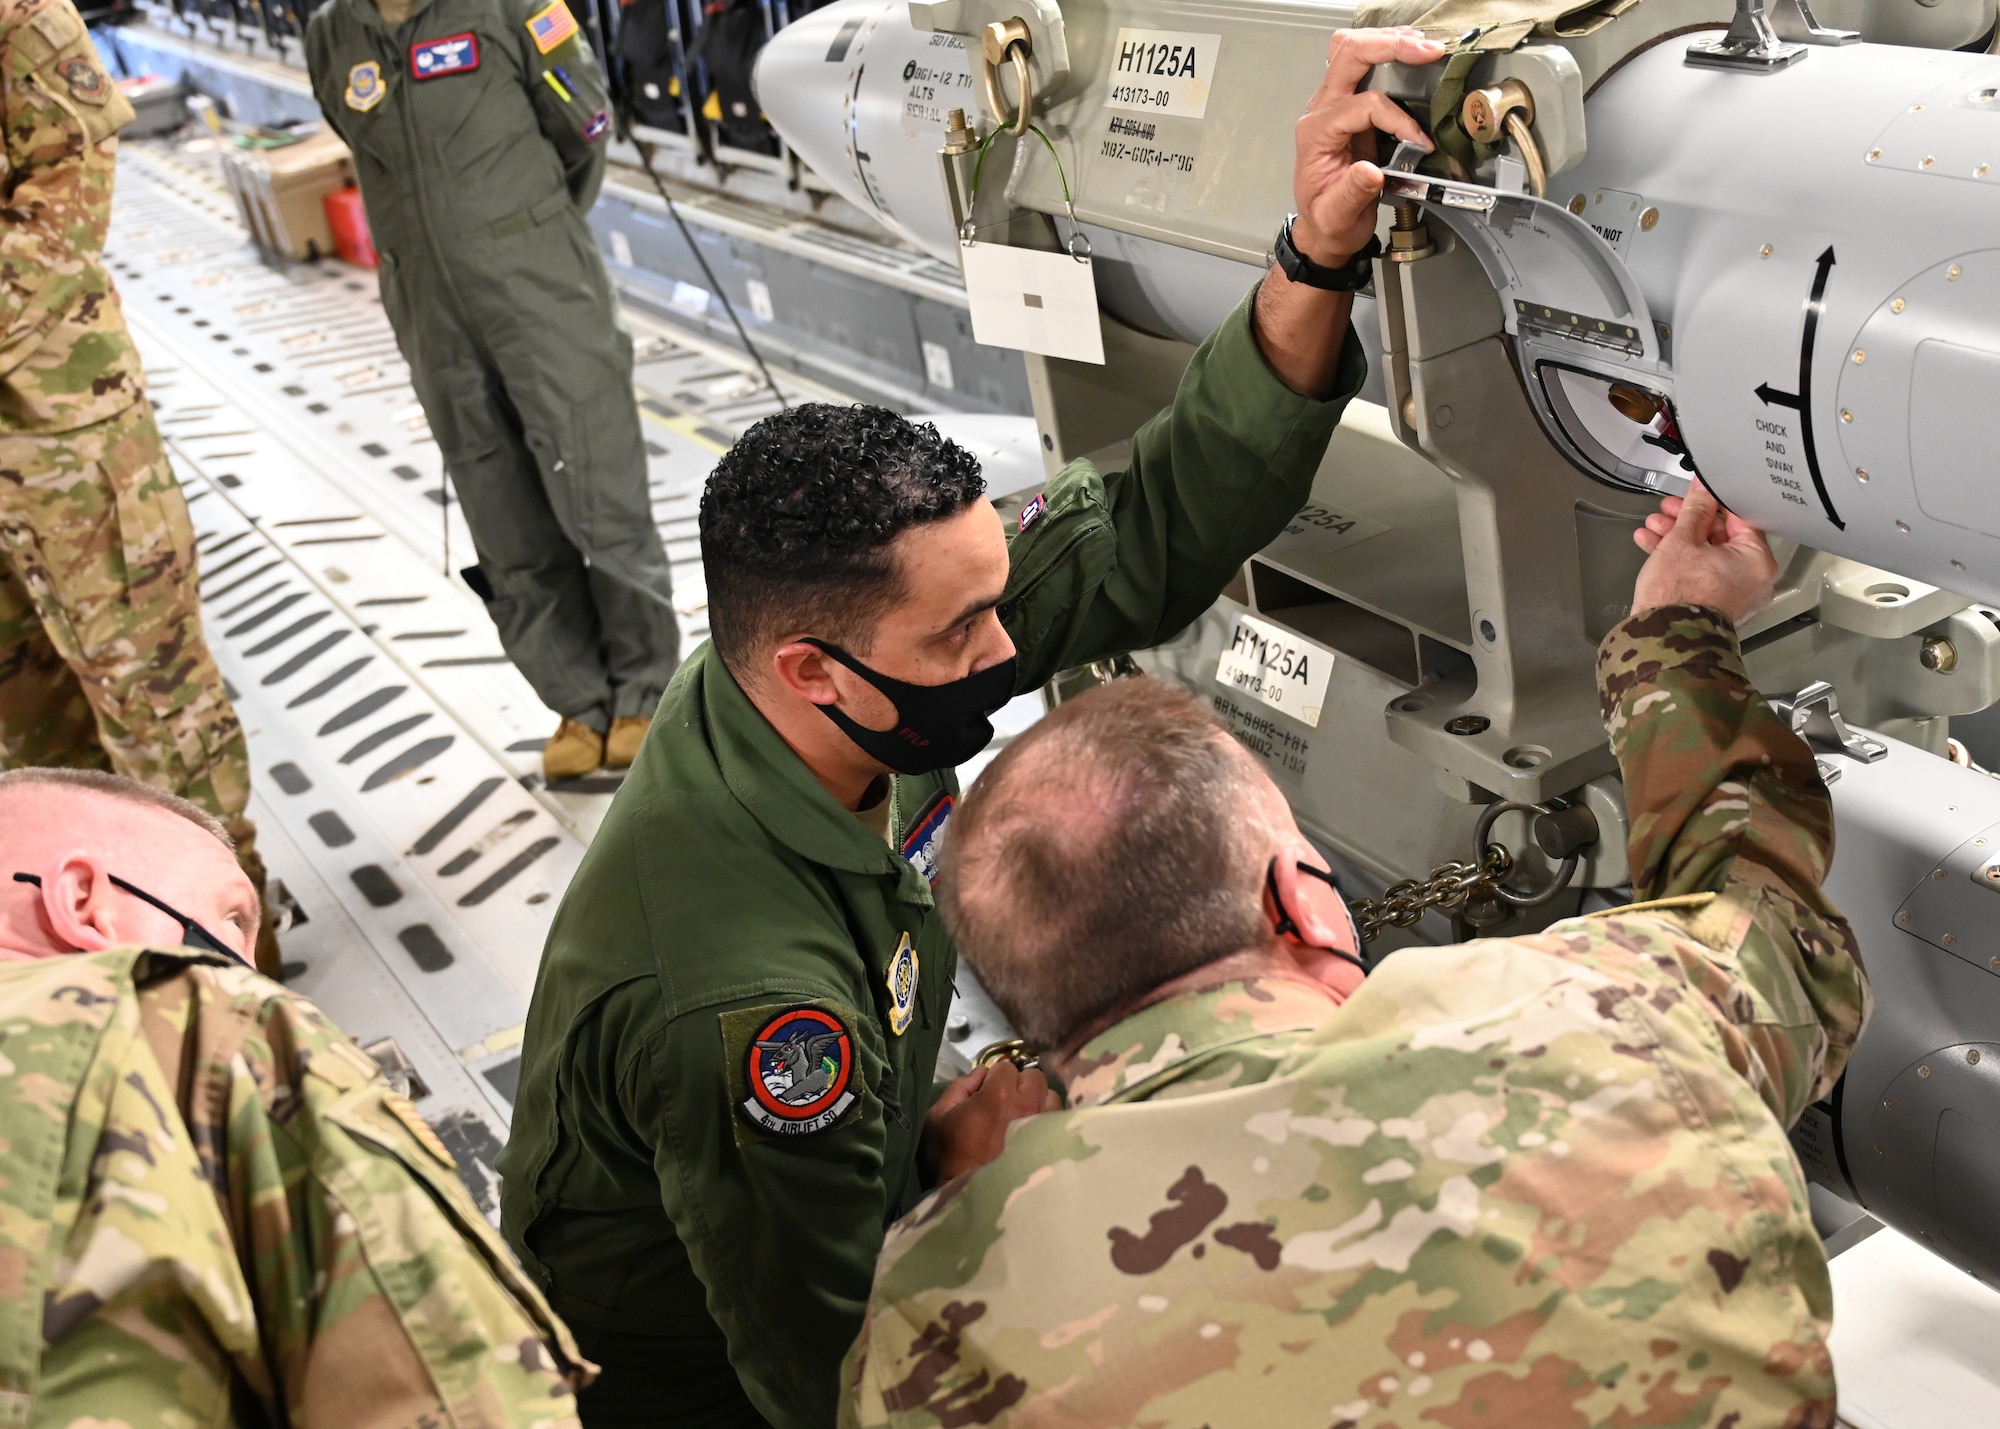 U.S. Air Force Staff Sgt. Gabriel Gonzales, 4th Airlift Squadron loadmaster, briefs Maj. Gen. Thad Bibb, 18th Air Force commander, and Chief Master Sgt. Chad Bickley, 18th AF command chief, on the Command Disablement System of a B-61 aboard a C-17 Globemaster III, at Joint Base Lewis-McChord, Washington, April 8, 2021. During the visit, Bibb and Bickley learned about the wing’s unique mobility mission and met with Airmen across the base, seeing firsthand who makes up Team McChord. (U.S. Air Force photo by Airman 1st Class Callie Norton)